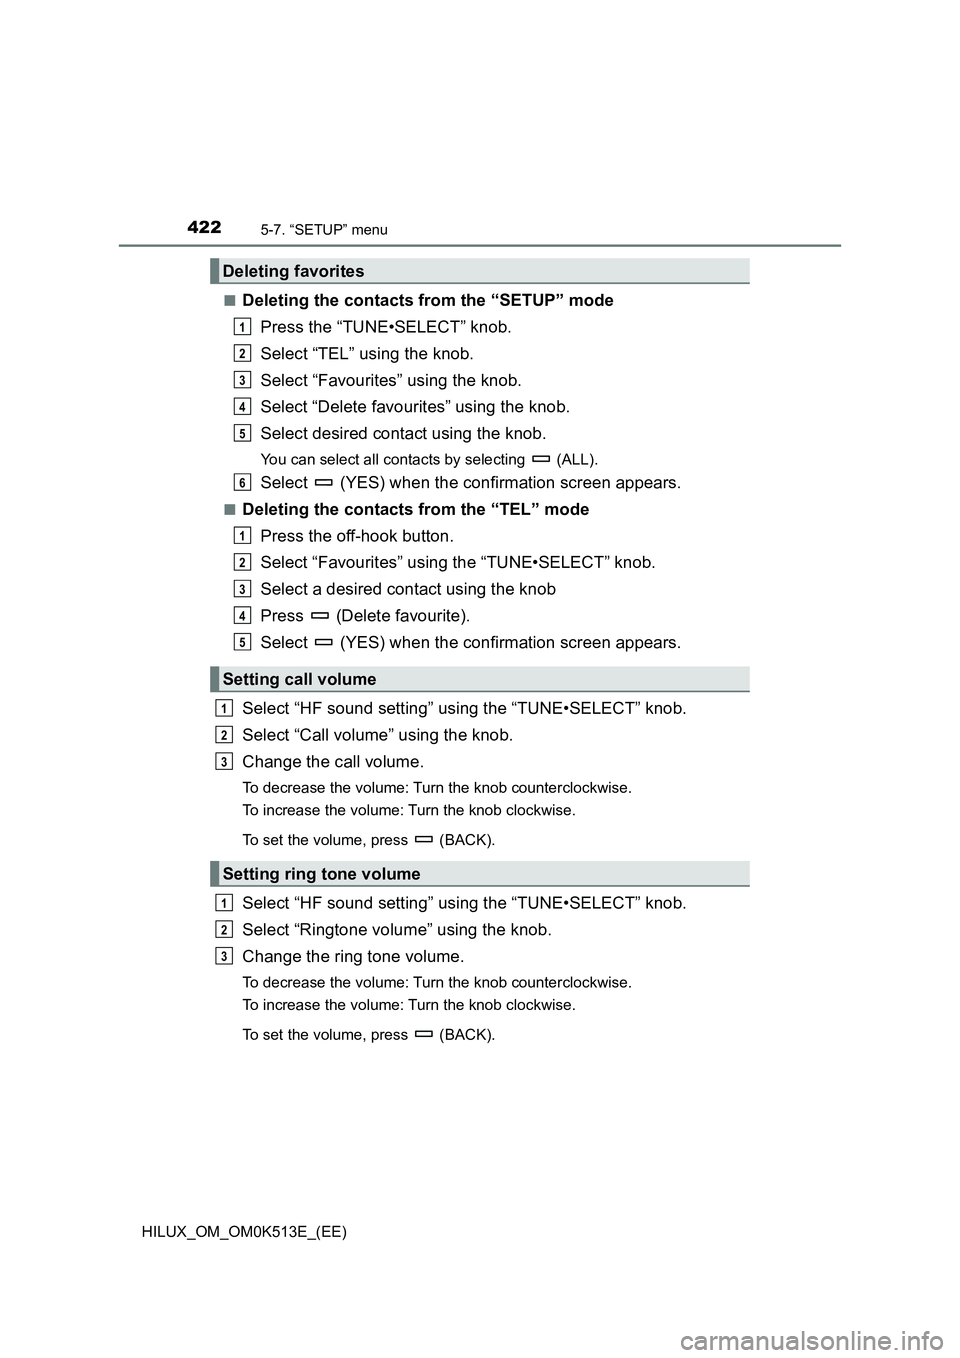 TOYOTA HILUX 2022  Owners Manual 4225-7. “SETUP” menu
HILUX_OM_OM0K513E_(EE) 
�QDeleting the contacts from the “SETUP” mode 
Press the “TUNE•SELECT” knob. 
Select “TEL” using the knob. 
Select “Favourites” using